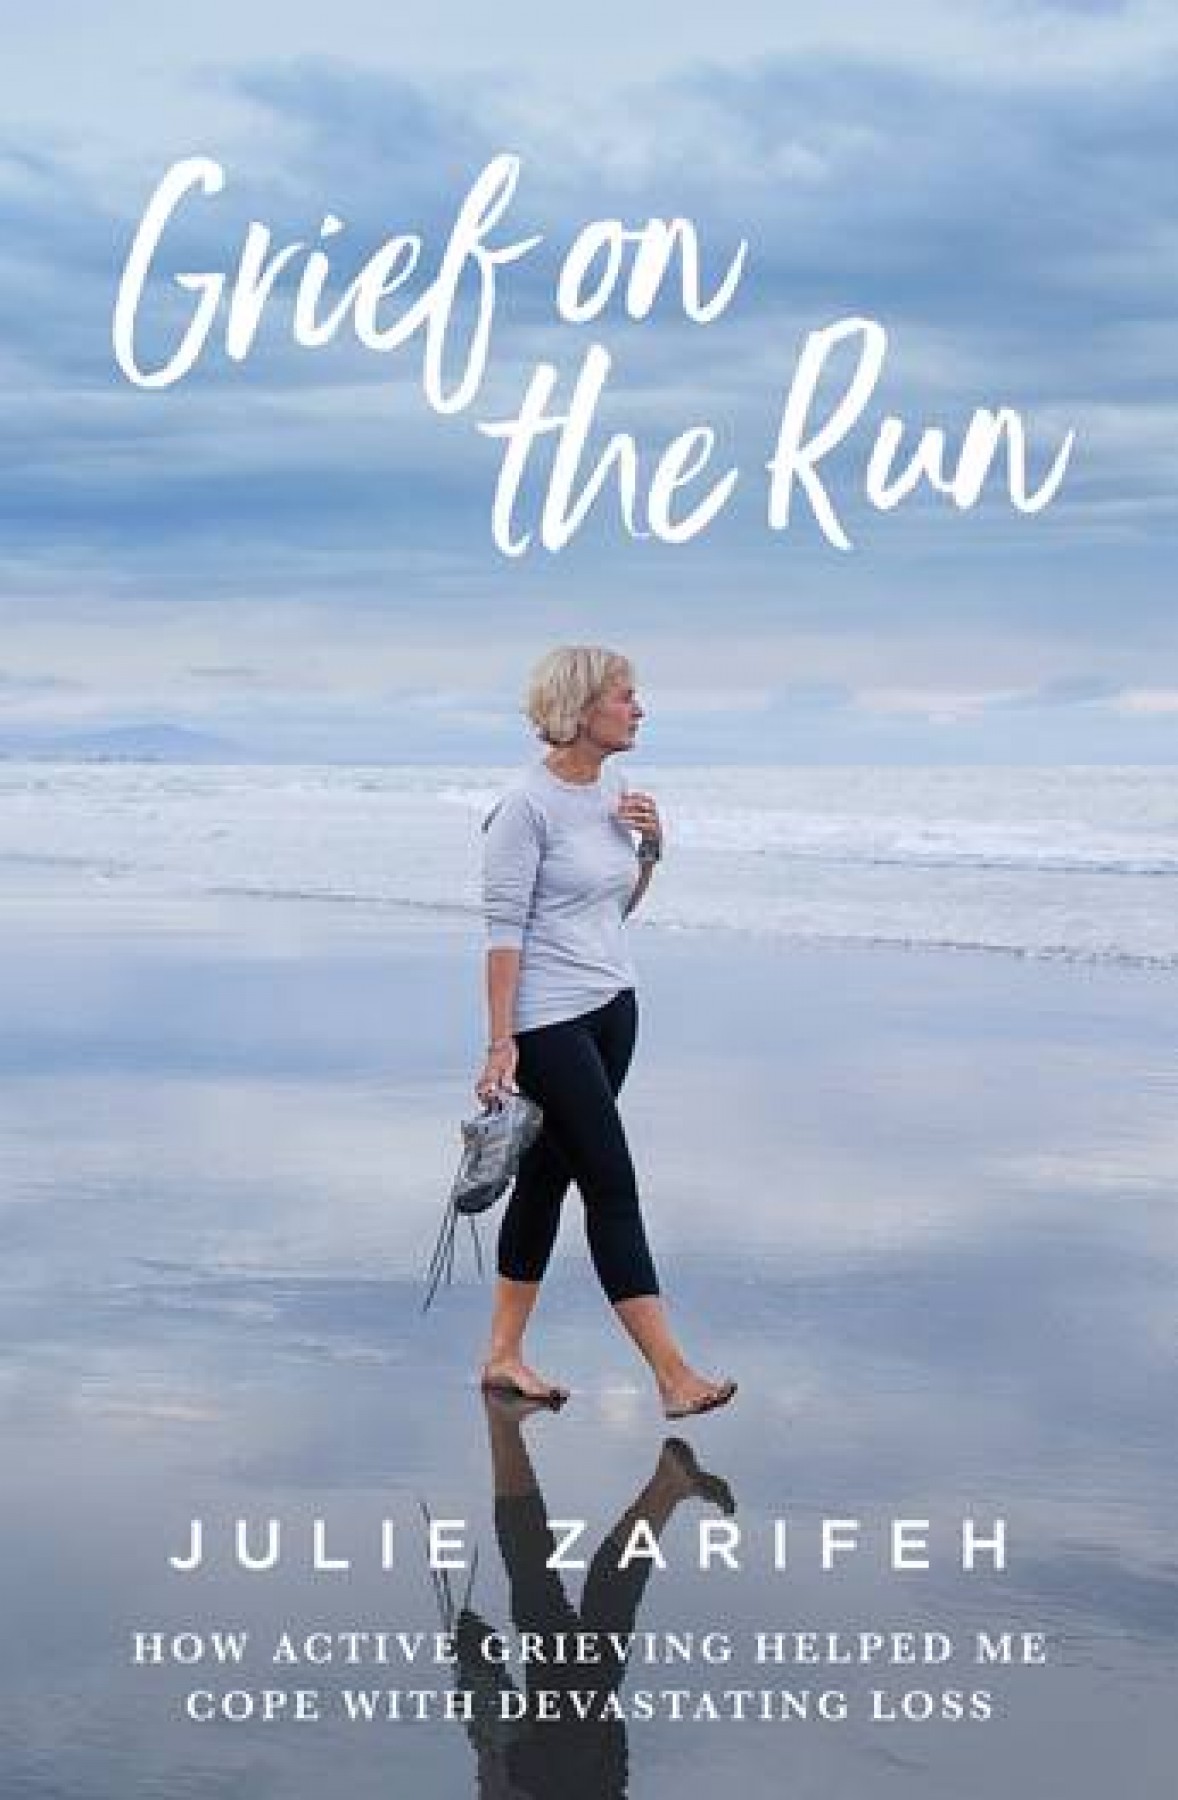 Grief on the run: How active grieving helped me deal with devastating loss